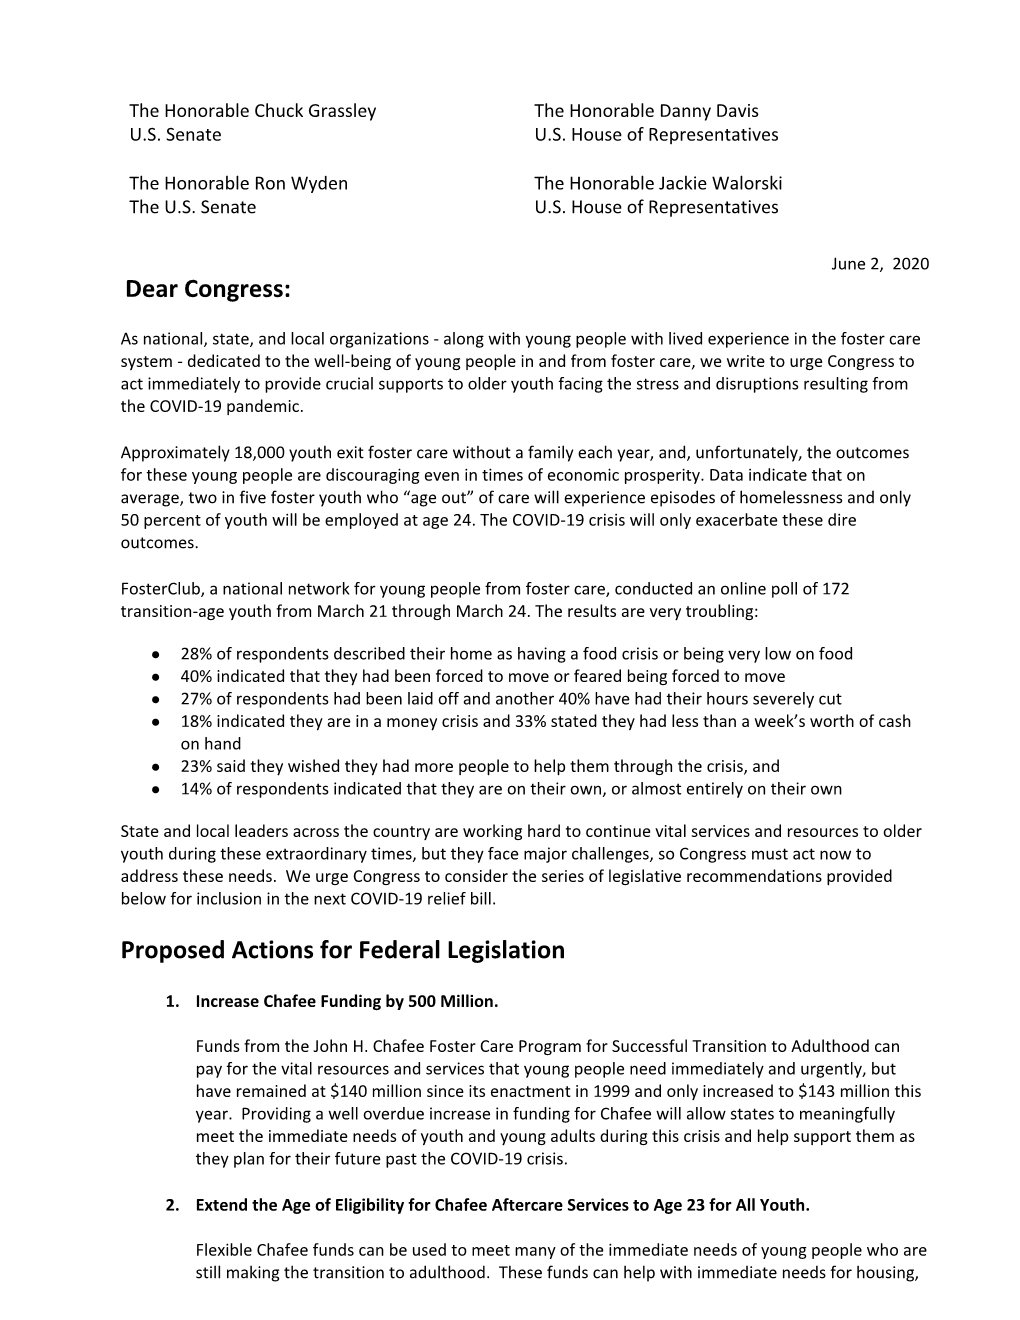 ​Dear Congress: Proposed Actions for Federal Legislation